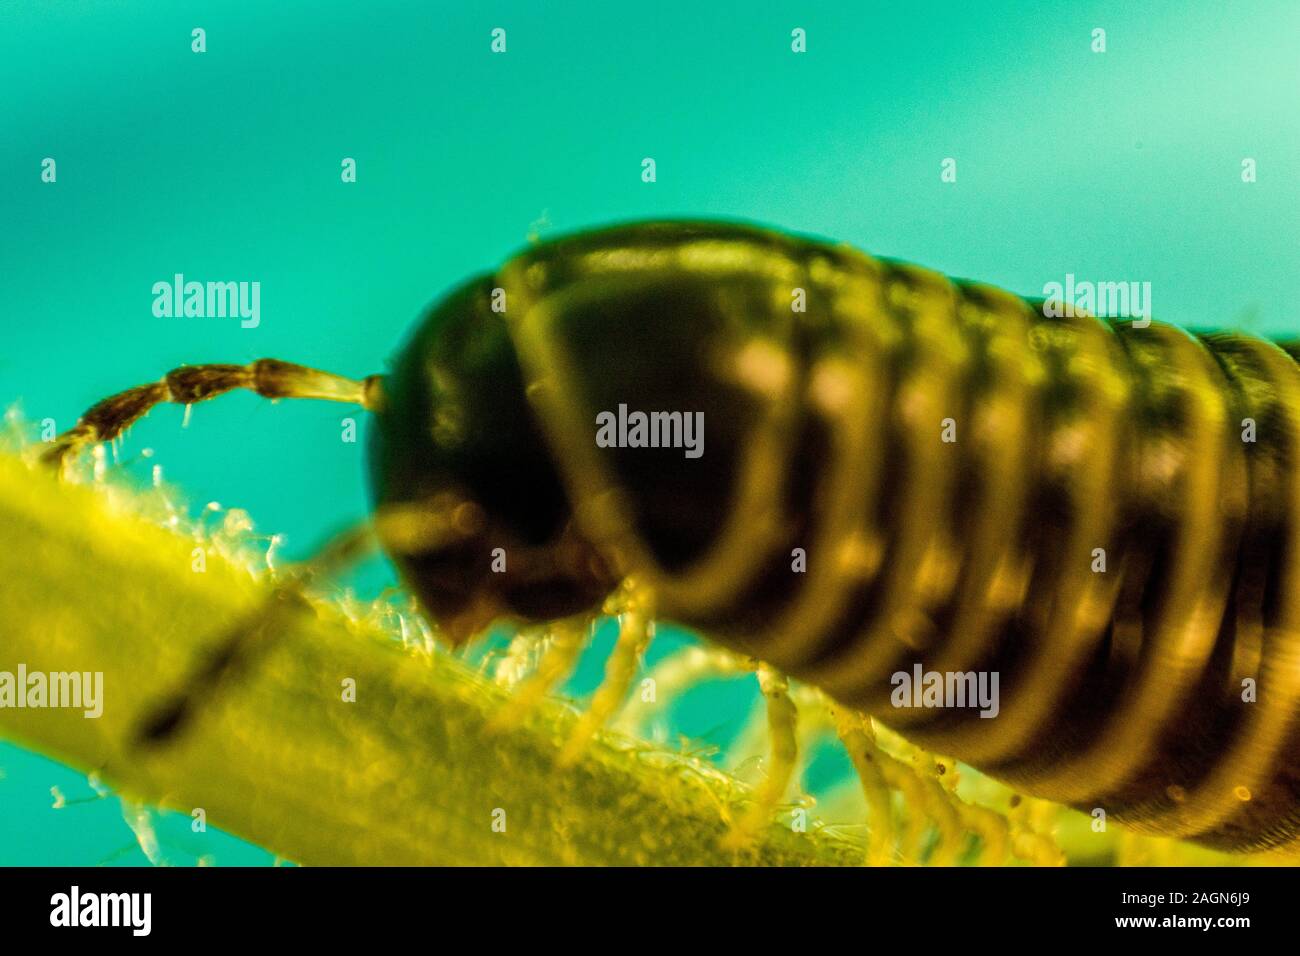 A closeup of a millipede insect with it's amazing armored body and lots of legs. Stock Photo